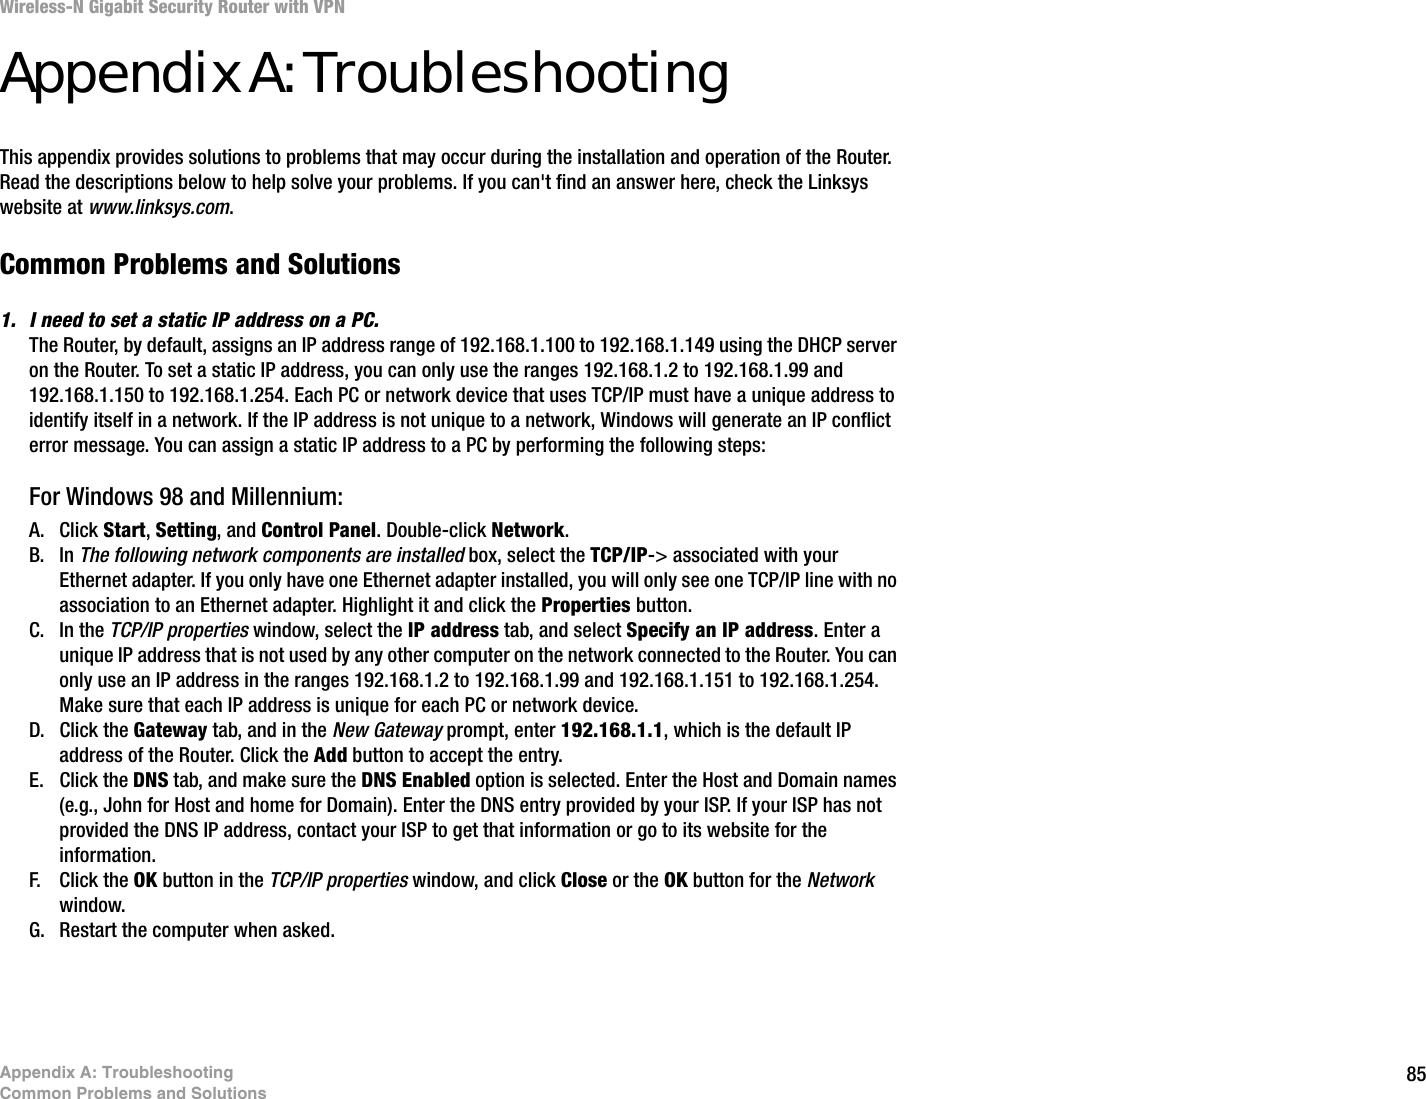 85Appendix A: TroubleshootingCommon Problems and SolutionsWireless-N Gigabit Security Router with VPNAppendix A: TroubleshootingThis appendix provides solutions to problems that may occur during the installation and operation of the Router. Read the descriptions below to help solve your problems. If you can&apos;t find an answer here, check the Linksys website at www.linksys.com.Common Problems and Solutions1. I need to set a static IP address on a PC.The Router, by default, assigns an IP address range of 192.168.1.100 to 192.168.1.149 using the DHCP server on the Router. To set a static IP address, you can only use the ranges 192.168.1.2 to 192.168.1.99 and 192.168.1.150 to 192.168.1.254. Each PC or network device that uses TCP/IP must have a unique address to identify itself in a network. If the IP address is not unique to a network, Windows will generate an IP conflict error message. You can assign a static IP address to a PC by performing the following steps:For Windows 98 and Millennium:A. Click Start, Setting, and Control Panel. Double-click Network.B. In The following network components are installed box, select the TCP/IP-&gt; associated with your Ethernet adapter. If you only have one Ethernet adapter installed, you will only see one TCP/IP line with no association to an Ethernet adapter. Highlight it and click the Properties button.C. In the TCP/IP properties window, select the IP address tab, and select Specify an IP address. Enter a unique IP address that is not used by any other computer on the network connected to the Router. You can only use an IP address in the ranges 192.168.1.2 to 192.168.1.99 and 192.168.1.151 to 192.168.1.254. Make sure that each IP address is unique for each PC or network device.D. Click the Gateway tab, and in the New Gateway prompt, enter 192.168.1.1, which is the default IP address of the Router. Click the Add button to accept the entry.E. Click the DNS tab, and make sure the DNS Enabled option is selected. Enter the Host and Domain names (e.g., John for Host and home for Domain). Enter the DNS entry provided by your ISP. If your ISP has not provided the DNS IP address, contact your ISP to get that information or go to its website for the information.F. Click the OK button in the TCP/IP properties window, and click Close or the OK button for the Network window.G. Restart the computer when asked.